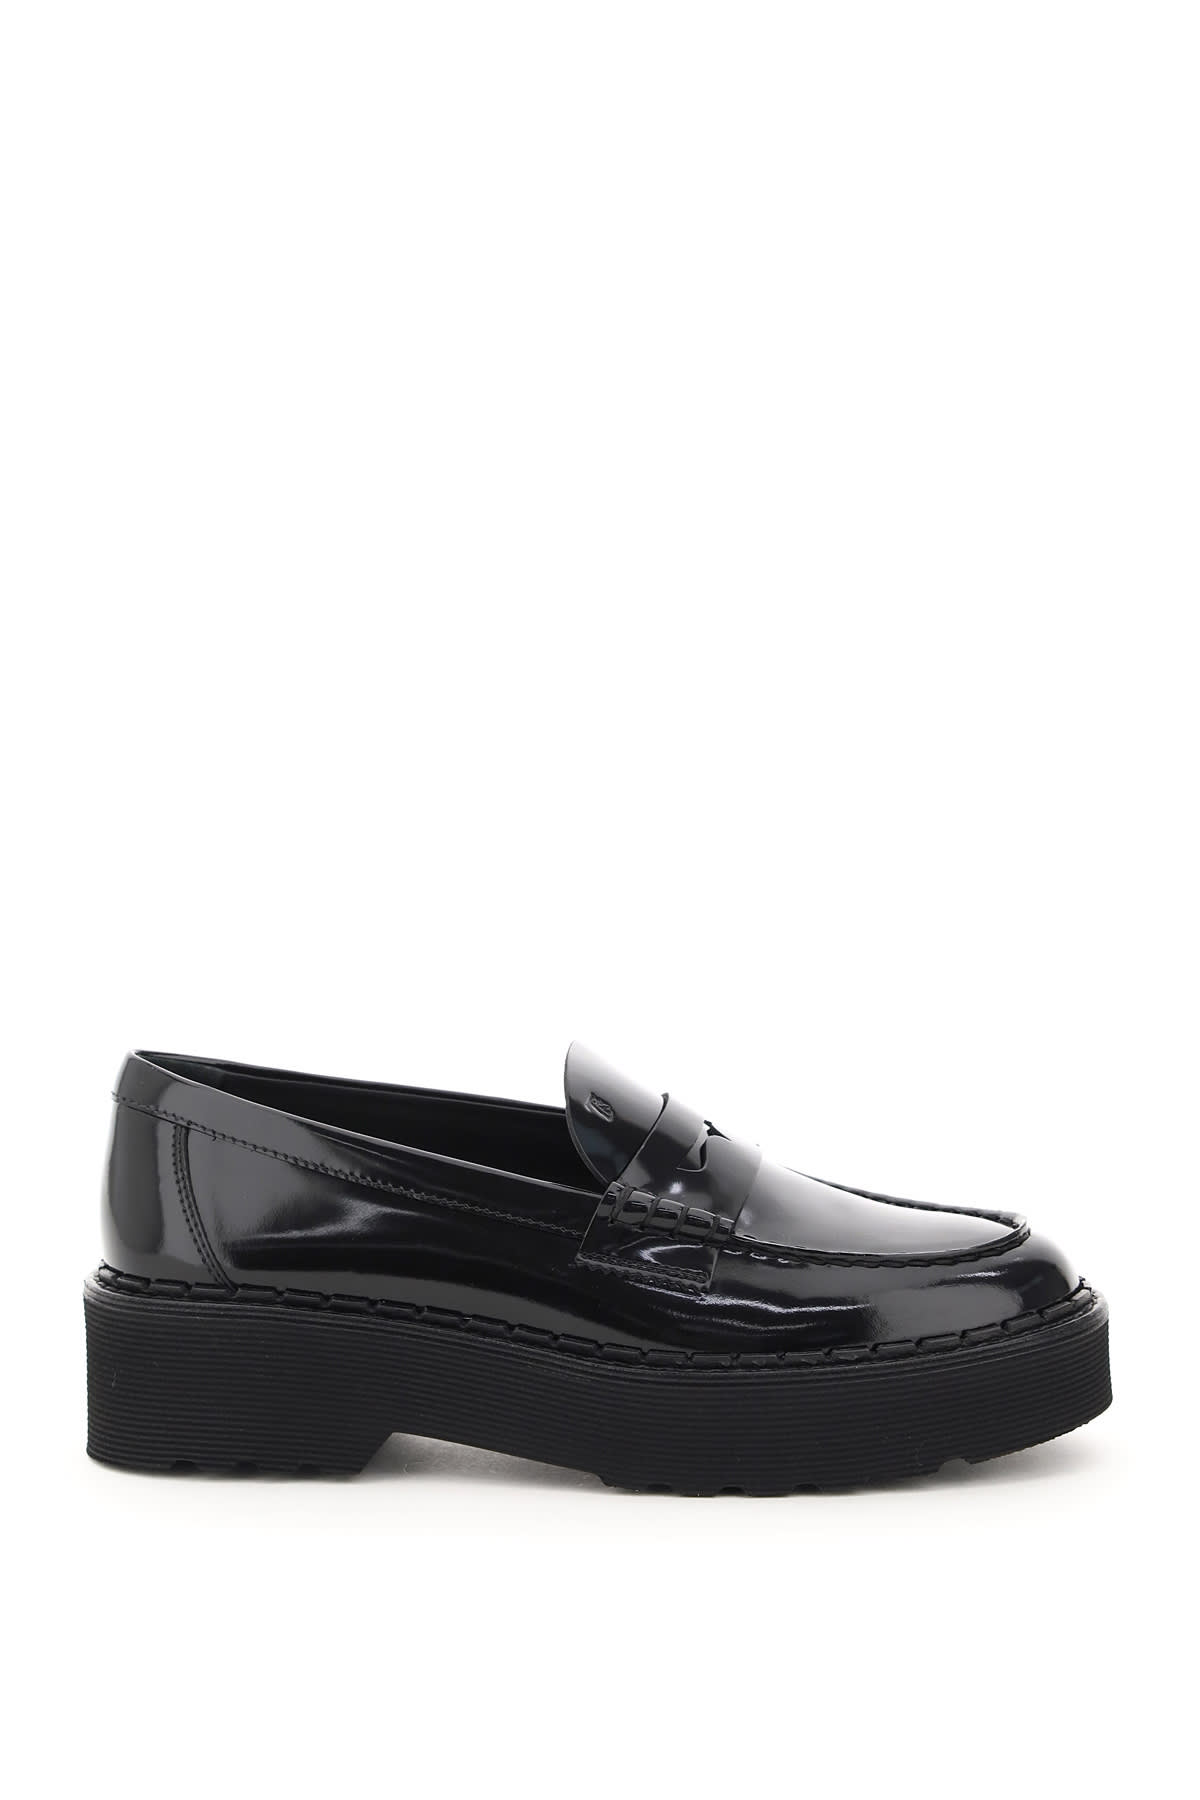 Tods Patent Leather Loafers